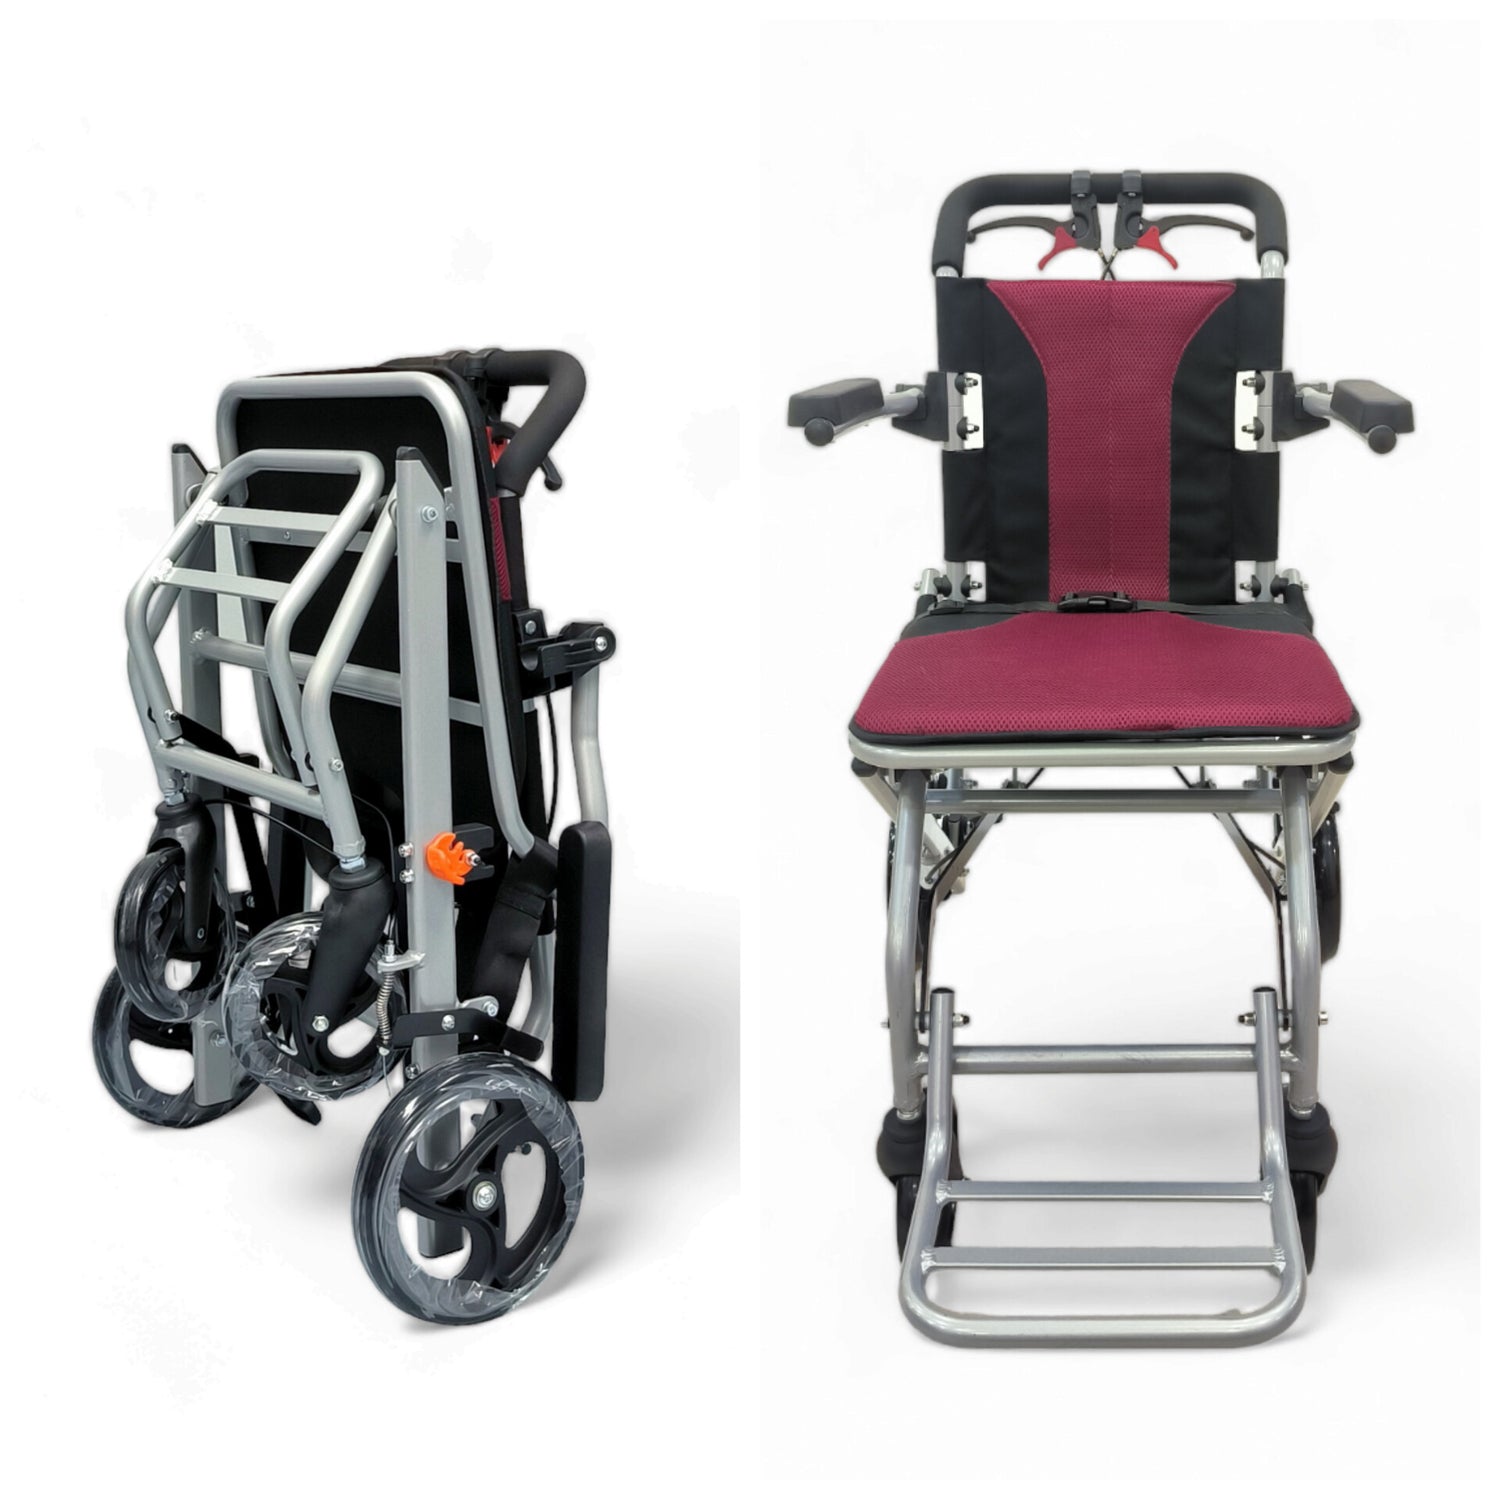 For Travel Overseas compact for plane - Traveler Pushchair